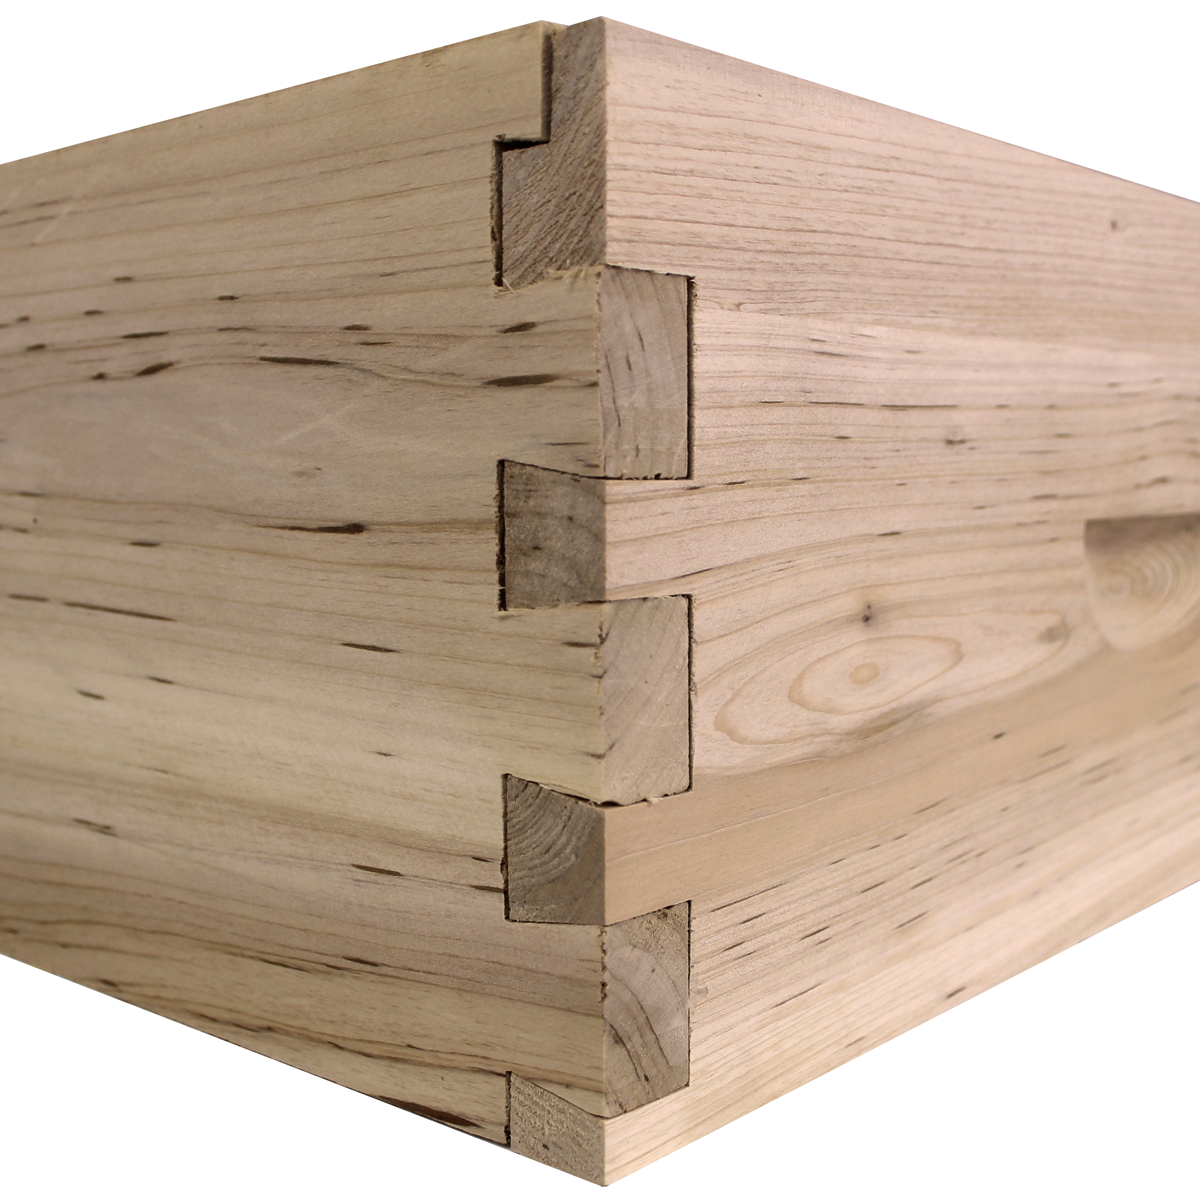 NuBee 10 Frame Medium Bee Box Uses Dovetail Joints